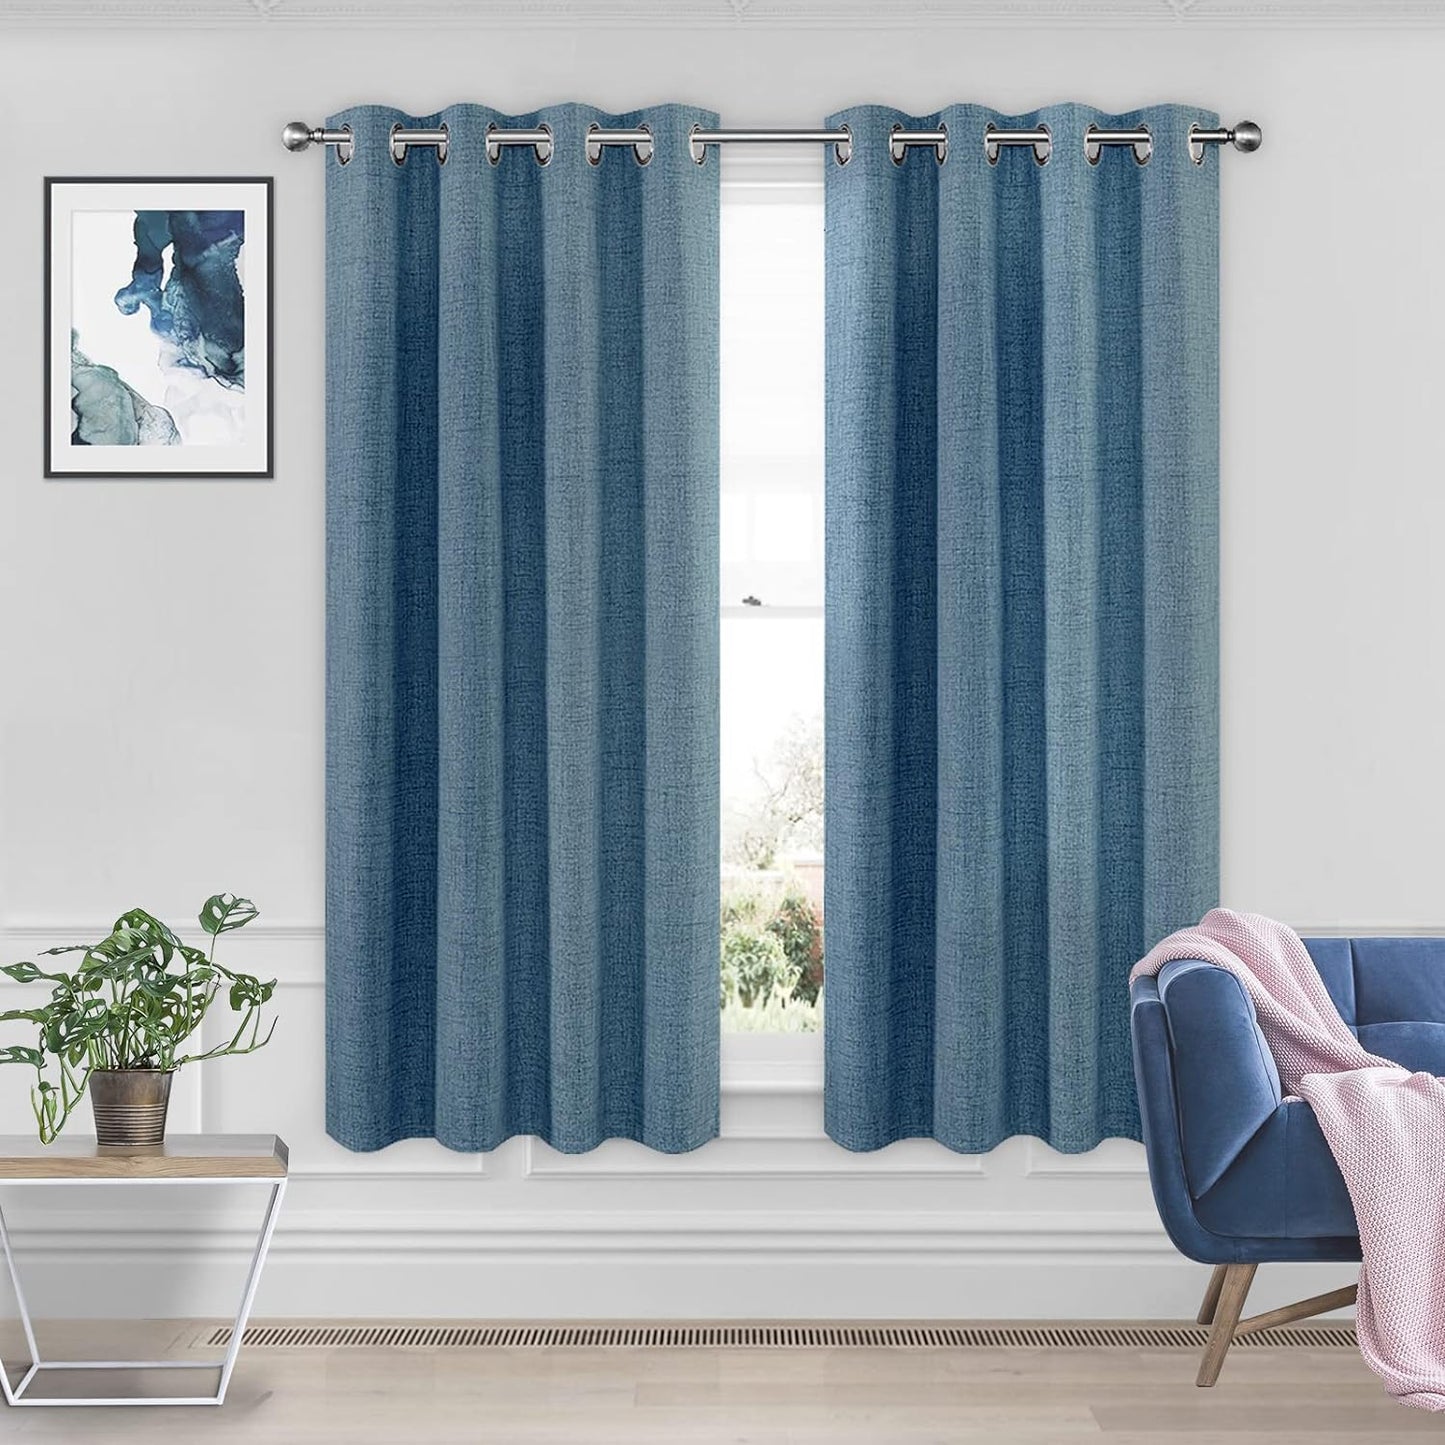 CUCRAF Full Blackout Window Curtains 84 Inches Long,Faux Linen Look Thermal Insulated Grommet Drapes Panels for Bedroom Living Room,Set of 2(52 X 84 Inches, Light Khaki)  CUCRAF Sky Blue 52 X 63 Inches 